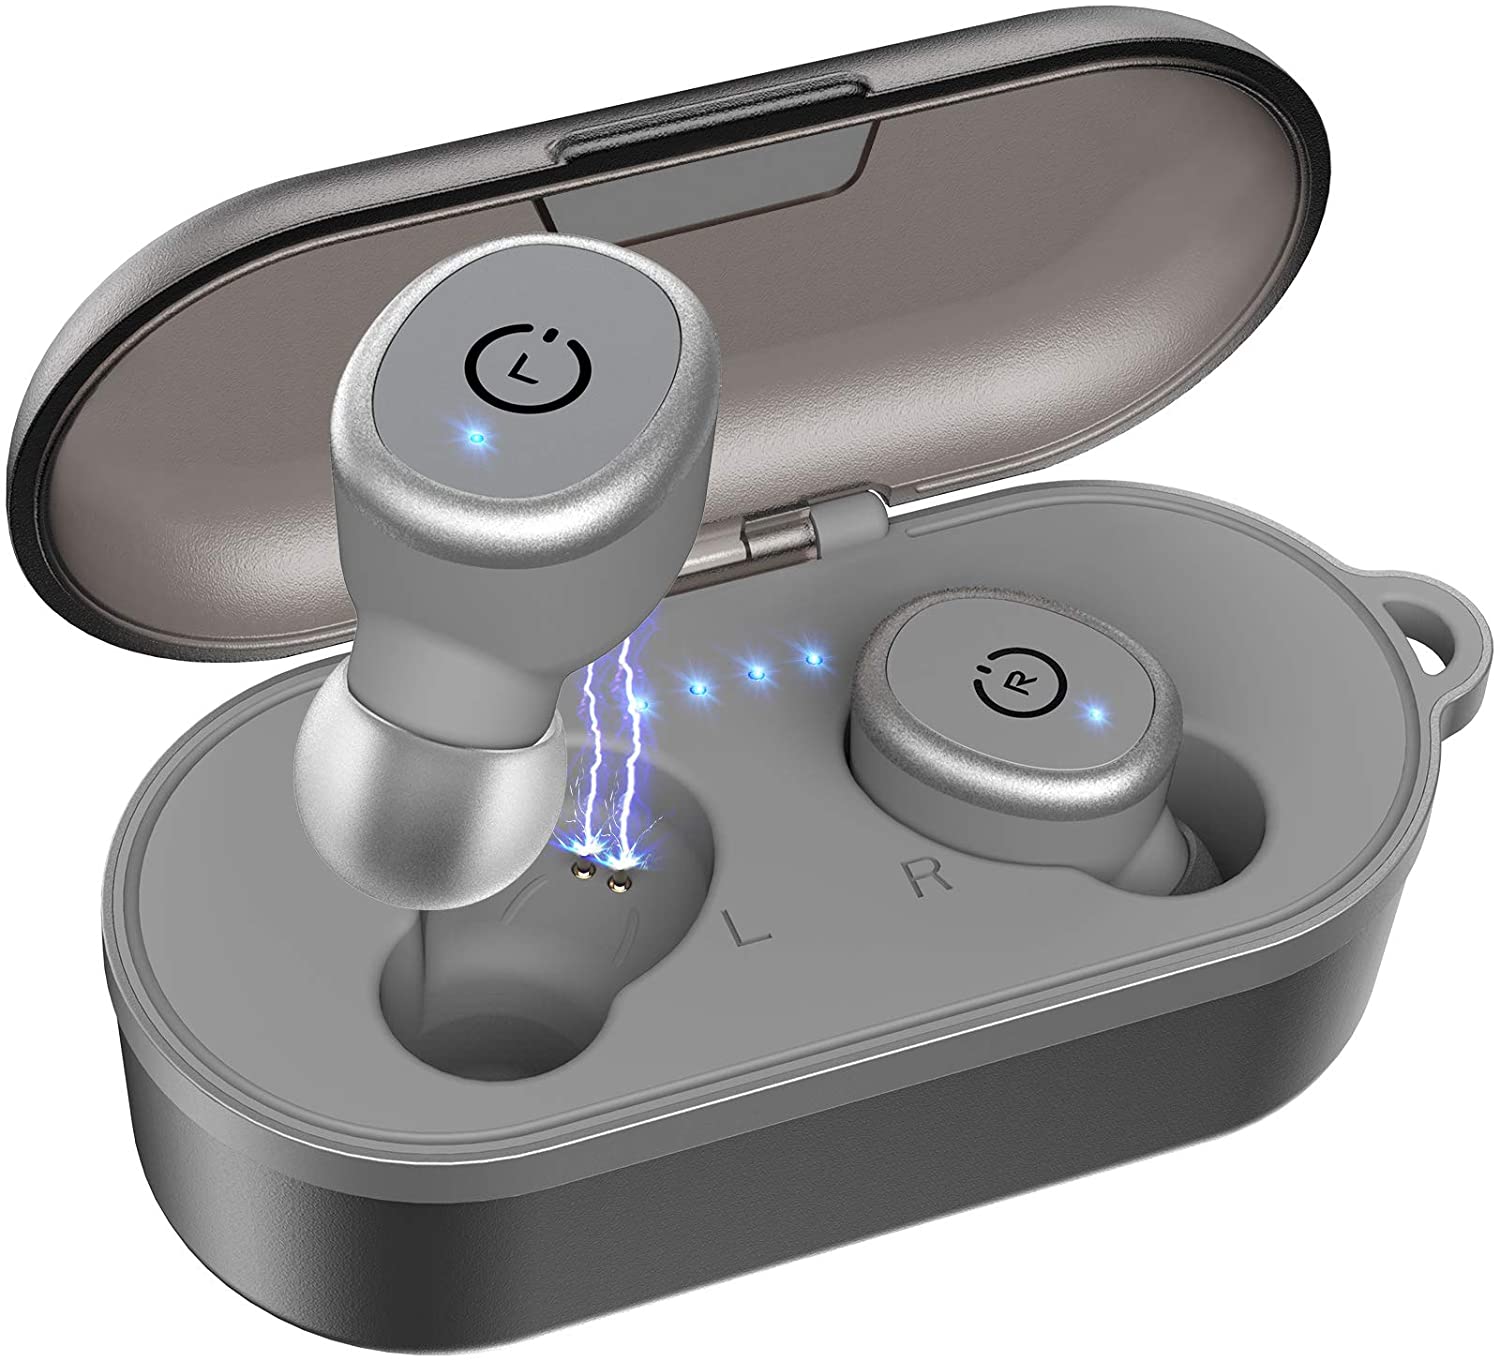 TOZO T10 Bluetooth 5.0 Wireless Earbuds with Wireless Charging Case ...